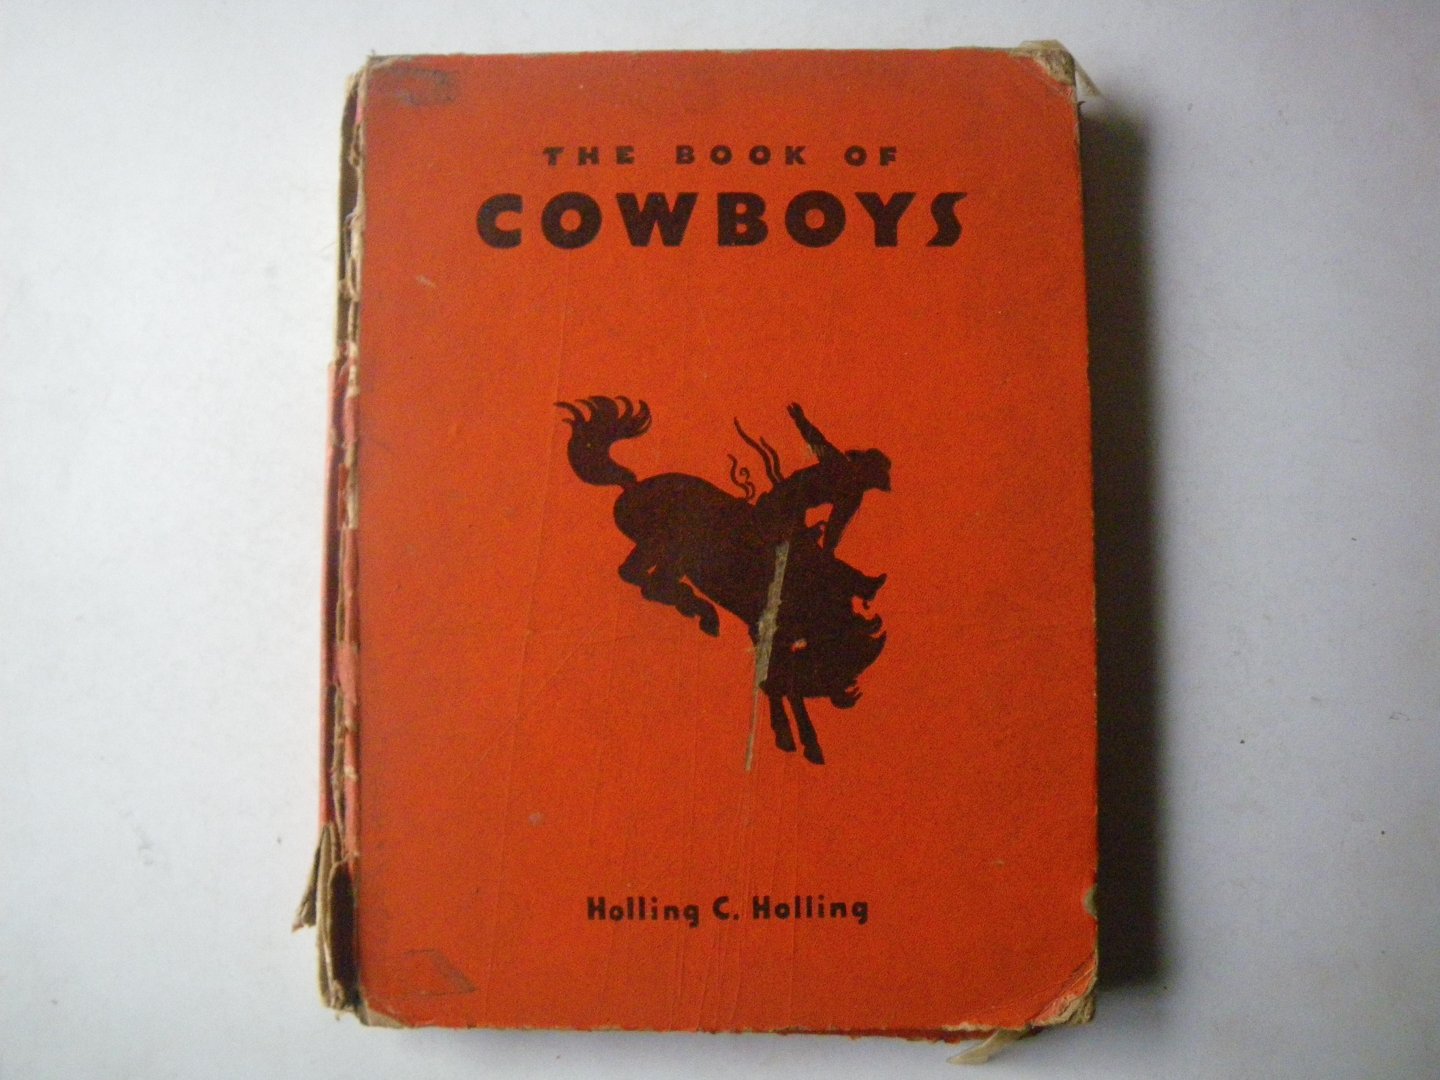 Holling, Holling C. - The book of cowboys